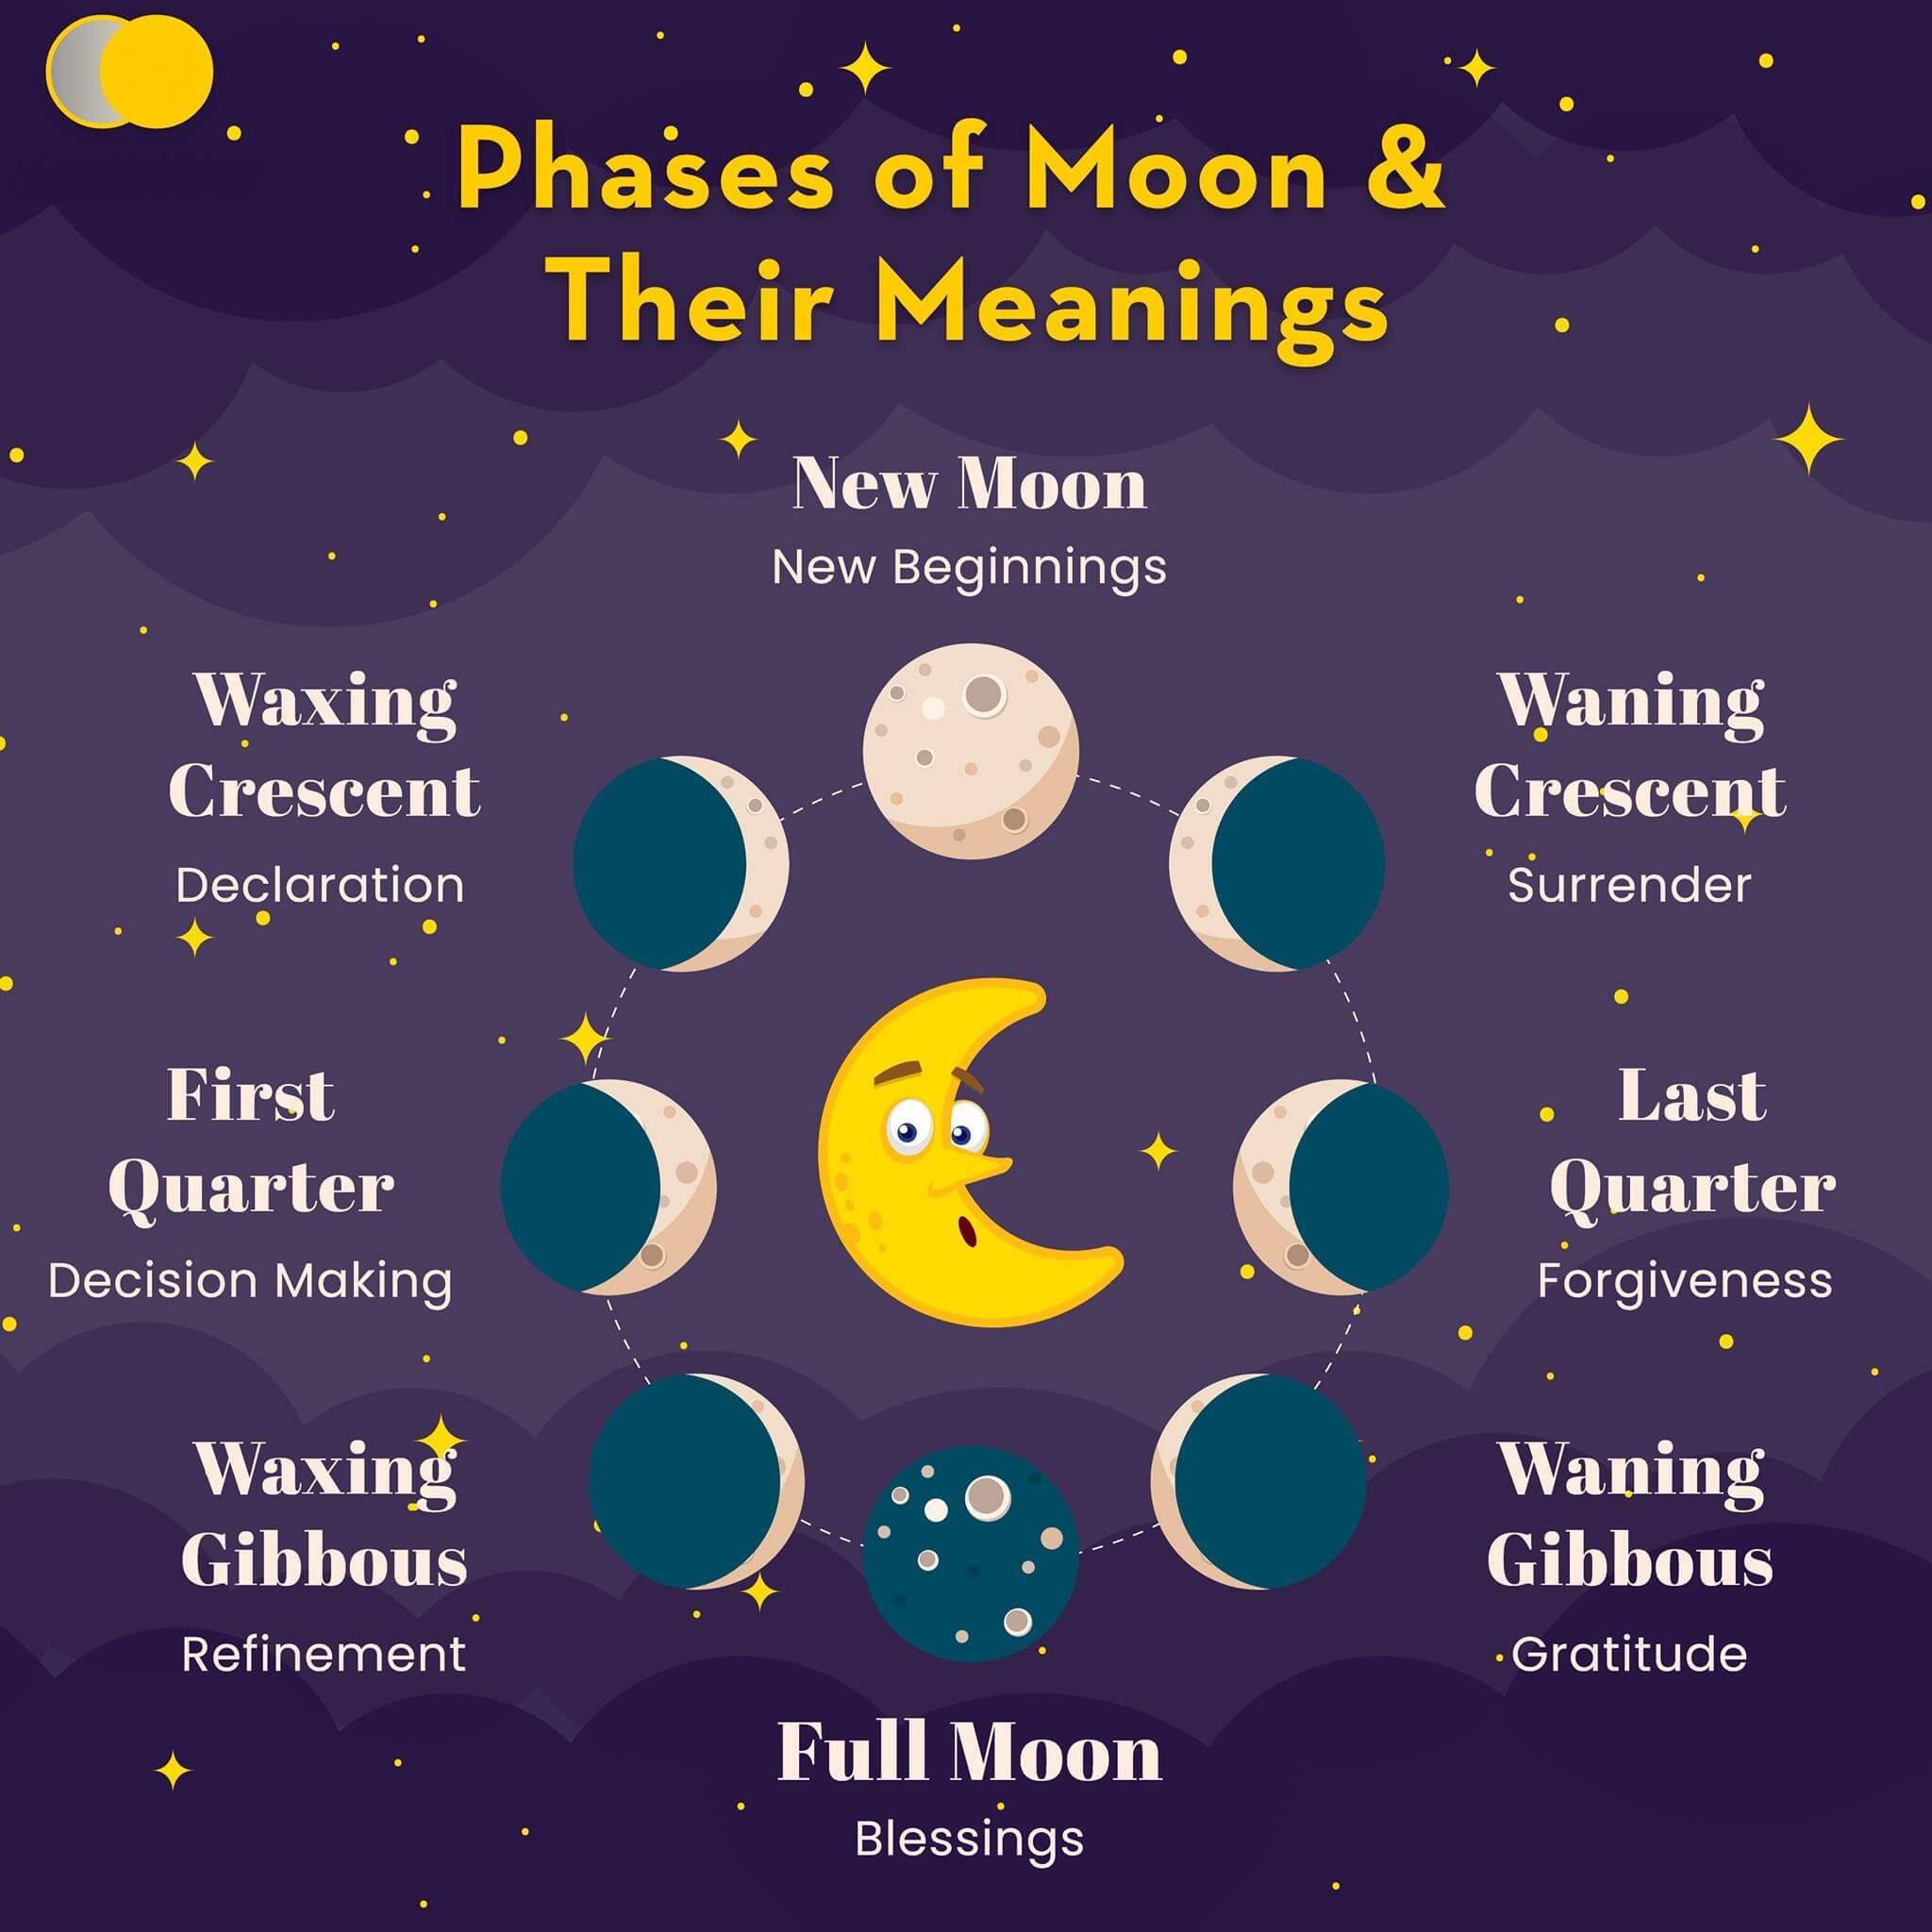 Phases of Moon and Their Meanings